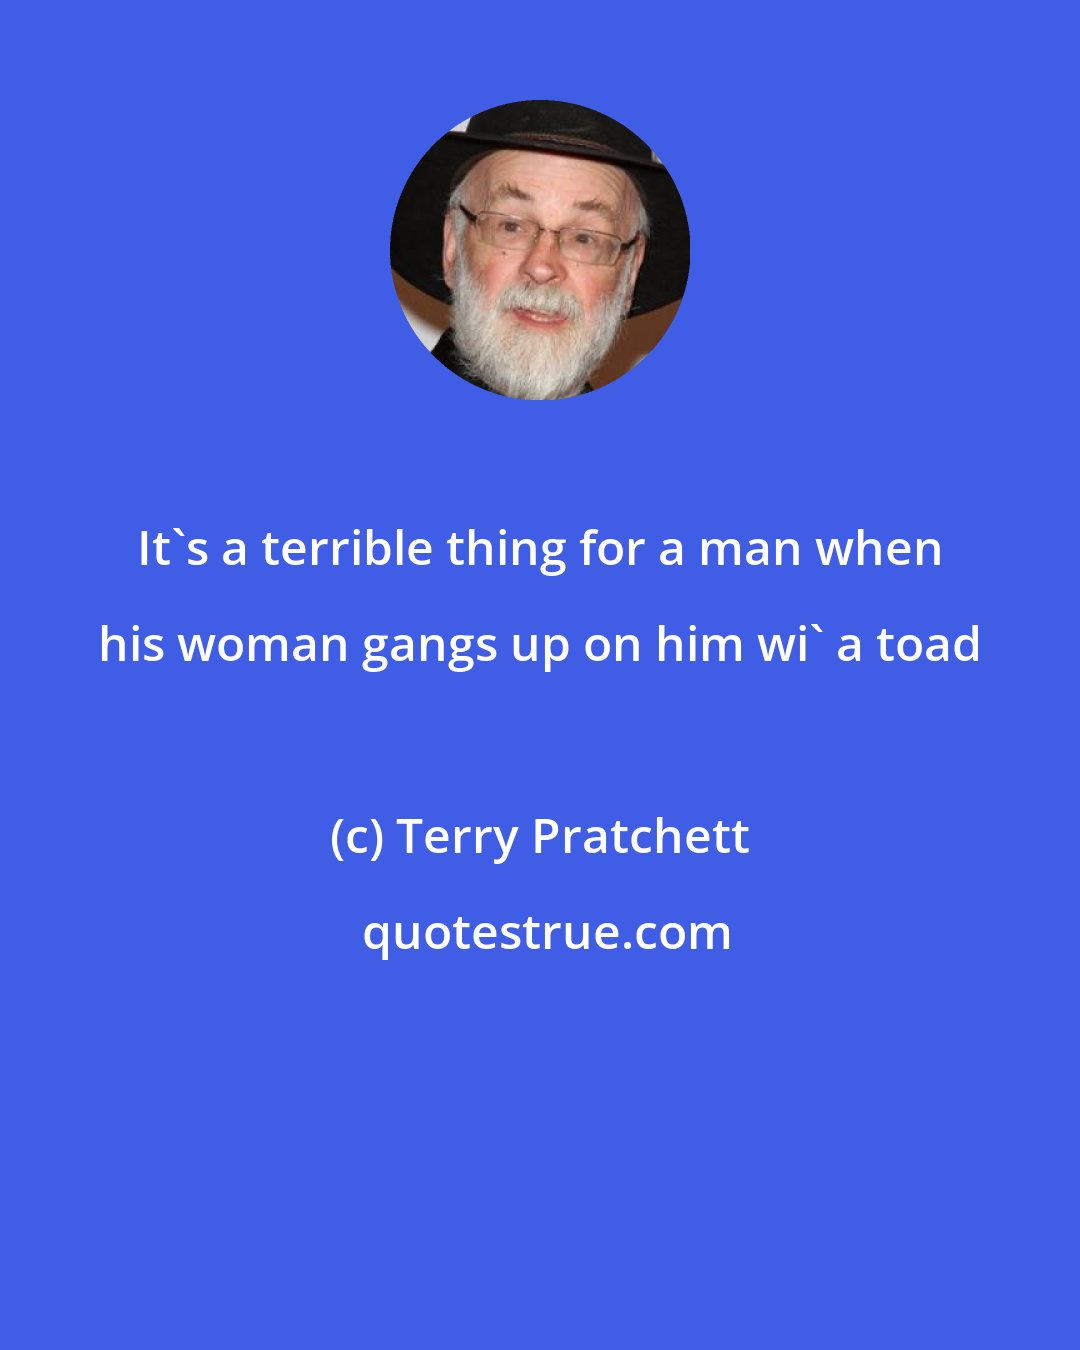 Terry Pratchett: It's a terrible thing for a man when his woman gangs up on him wi' a toad